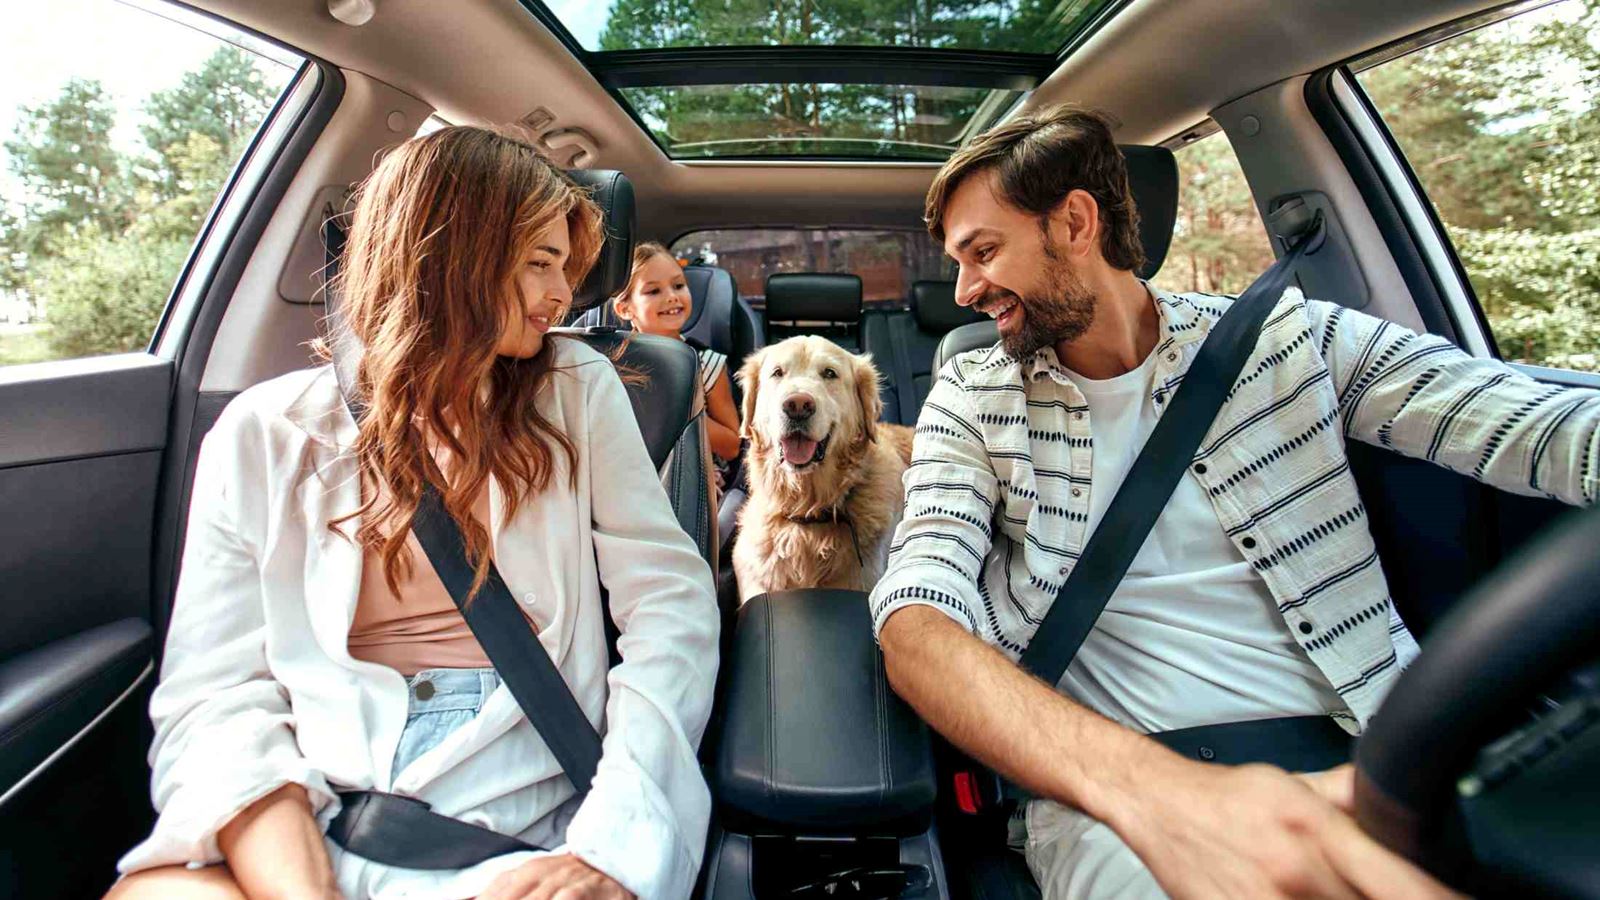 Mum, dad and young daughter sat in the car with their golden retriever dig sat between the front seats